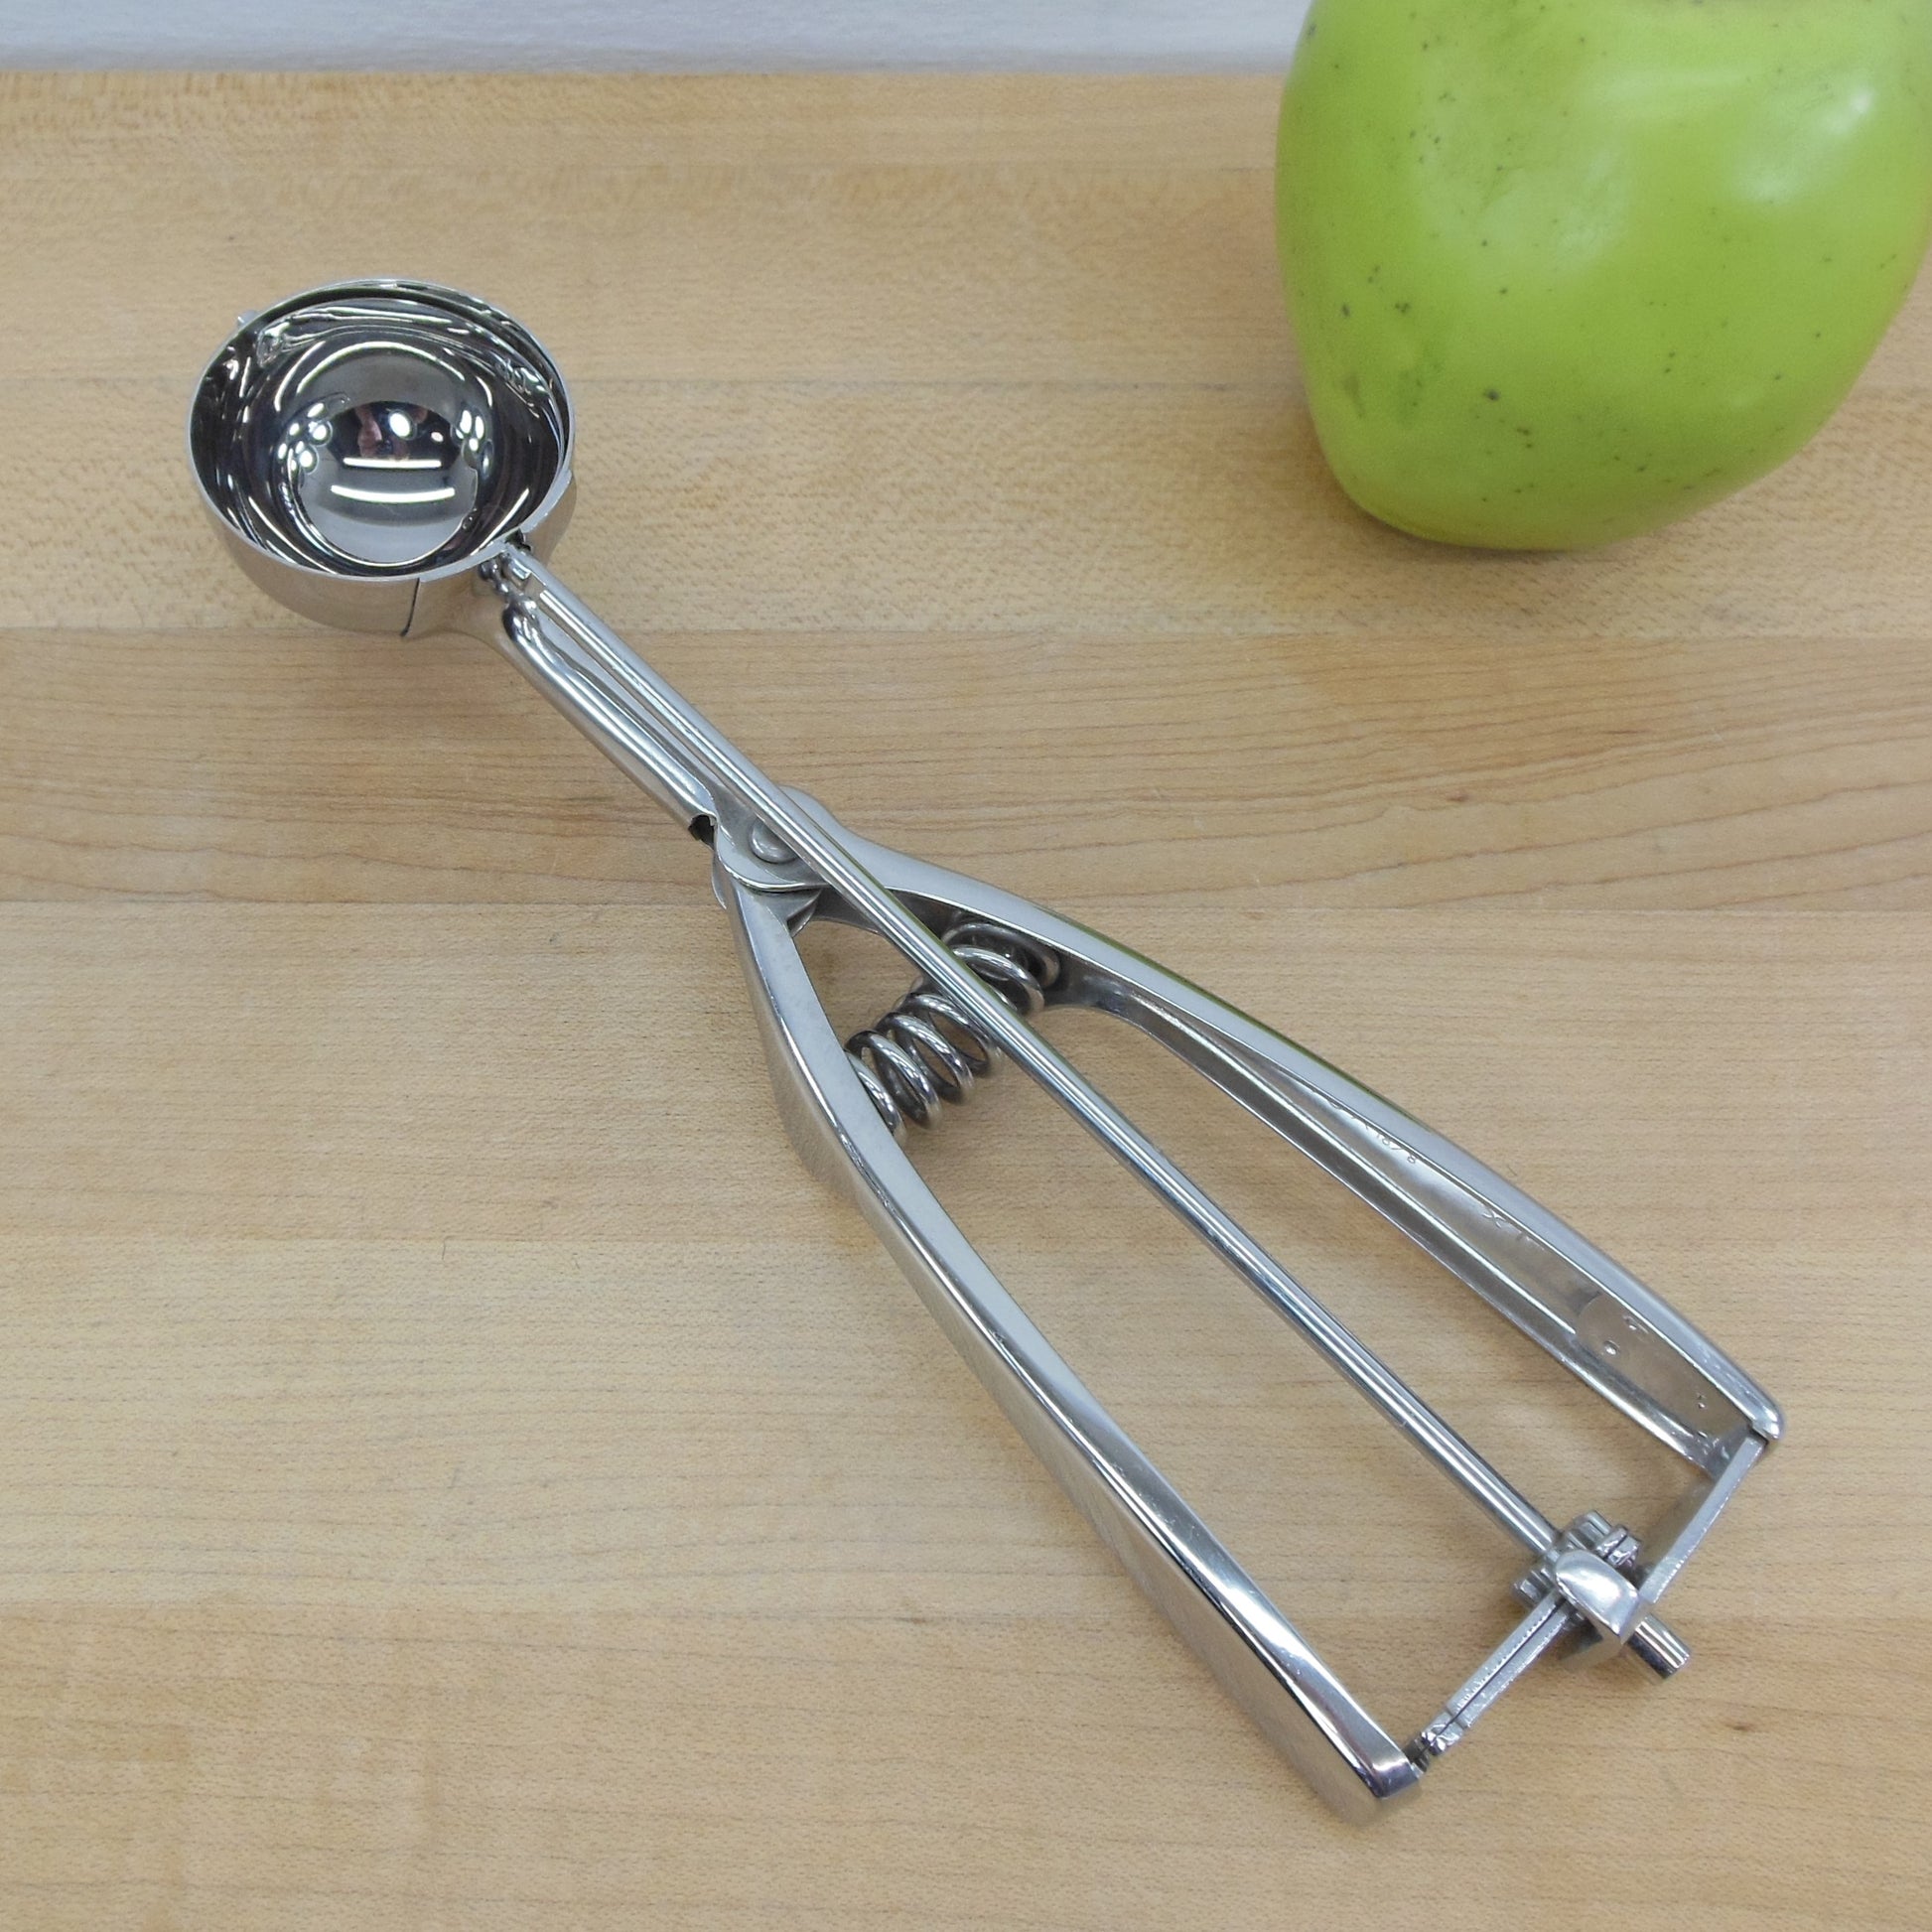 Pampered Chef Stainless Steel Whisk